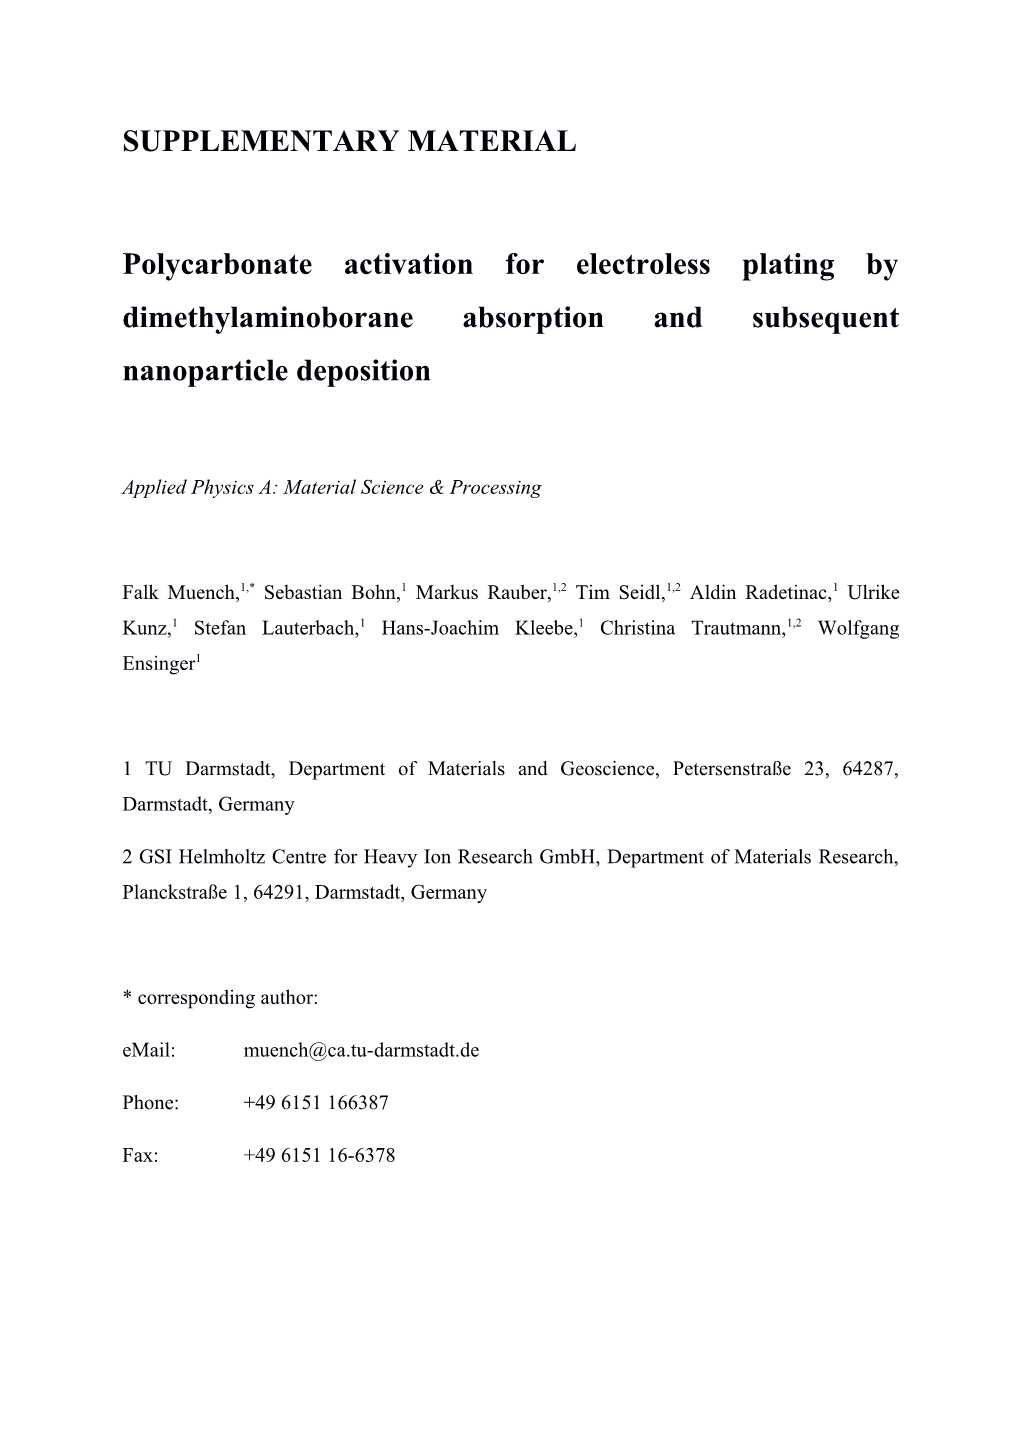 Polycarbonate Activation for Electroless Plating by Dimethylaminoborane Absorption And